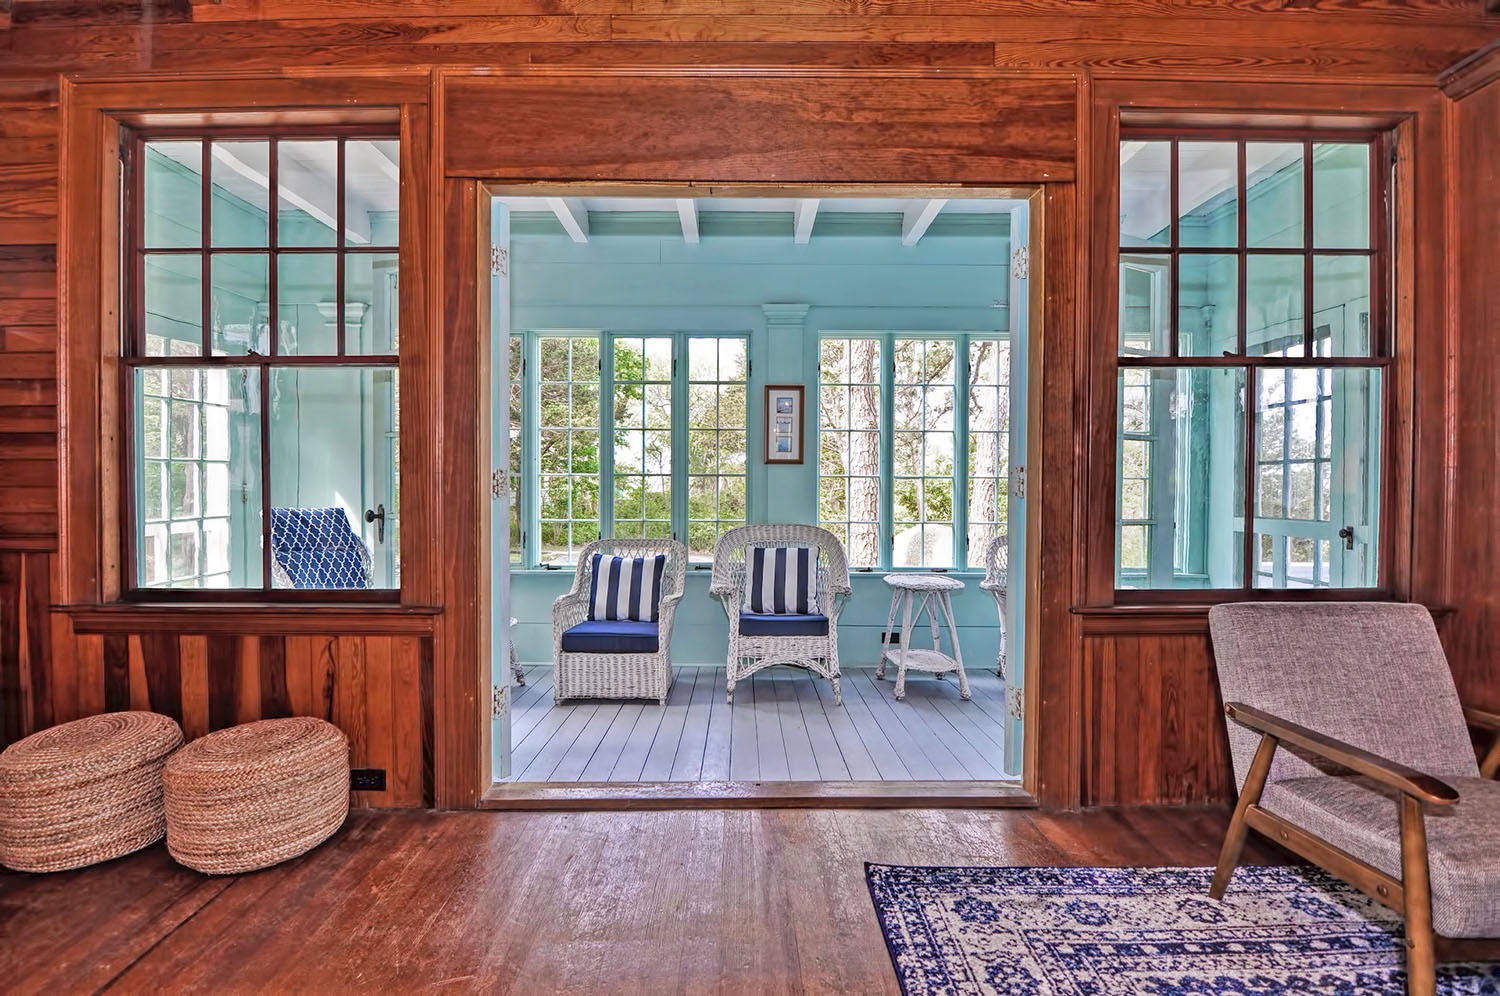 Unwind in the sun porch for some peace and quiet, and the views.